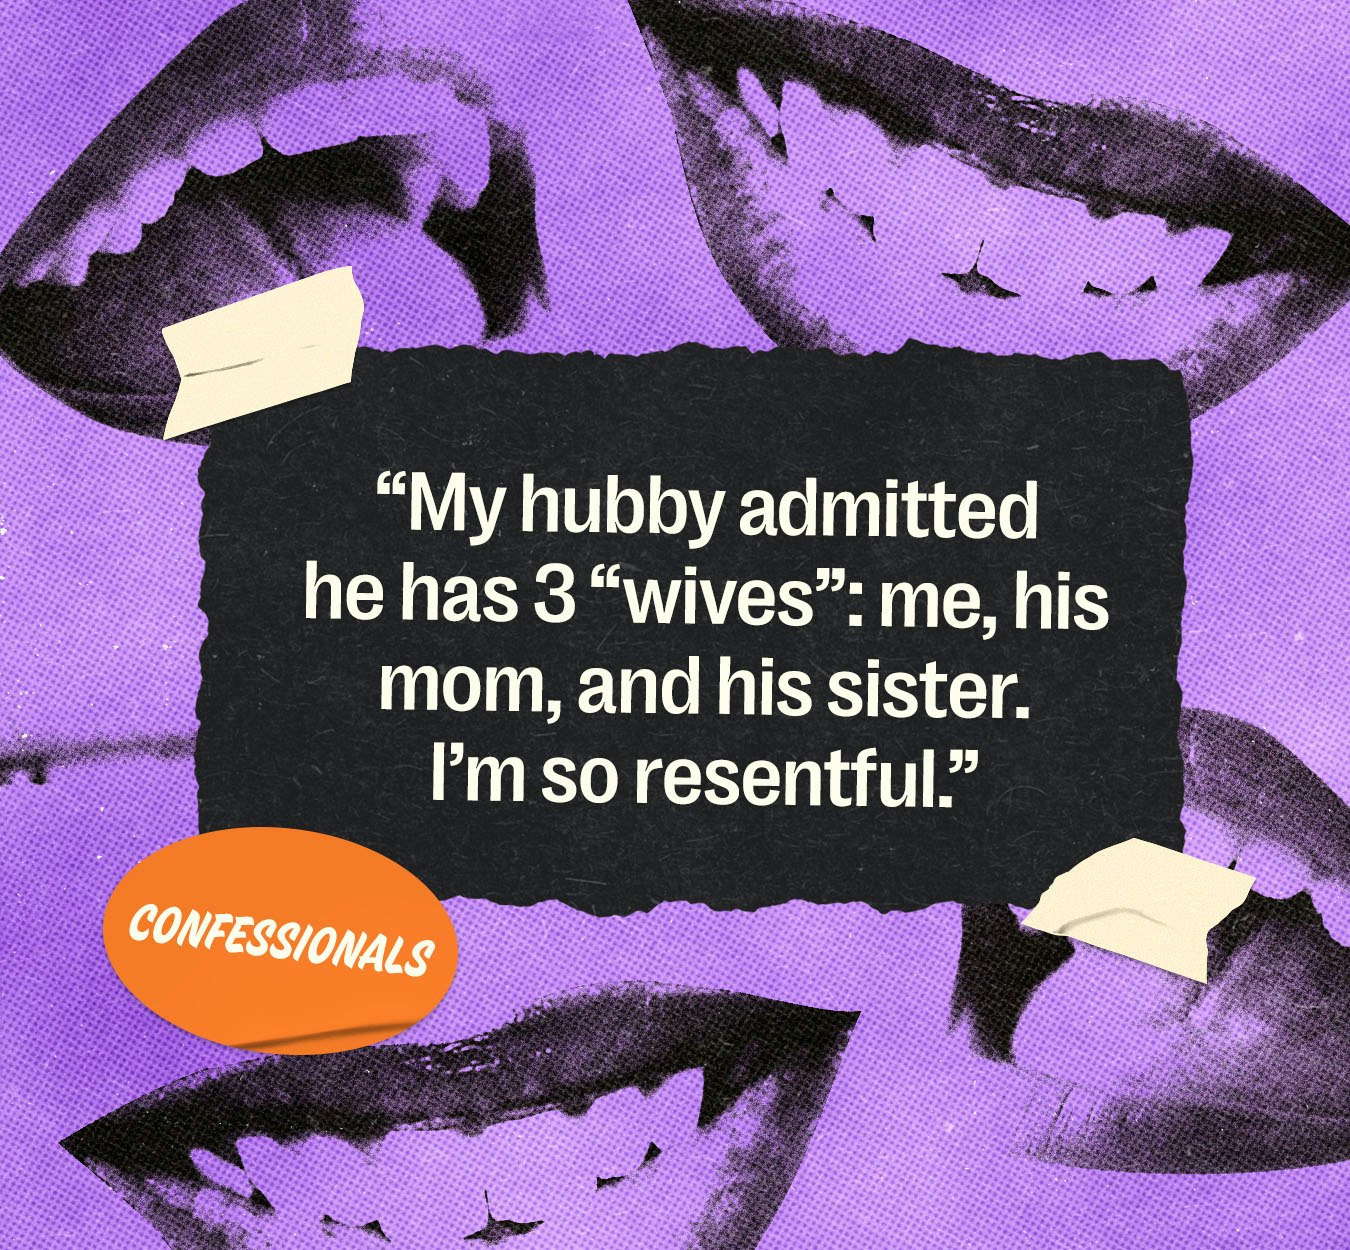 from-the-confessional:-my-hubby-admitted-he-has-3-wives